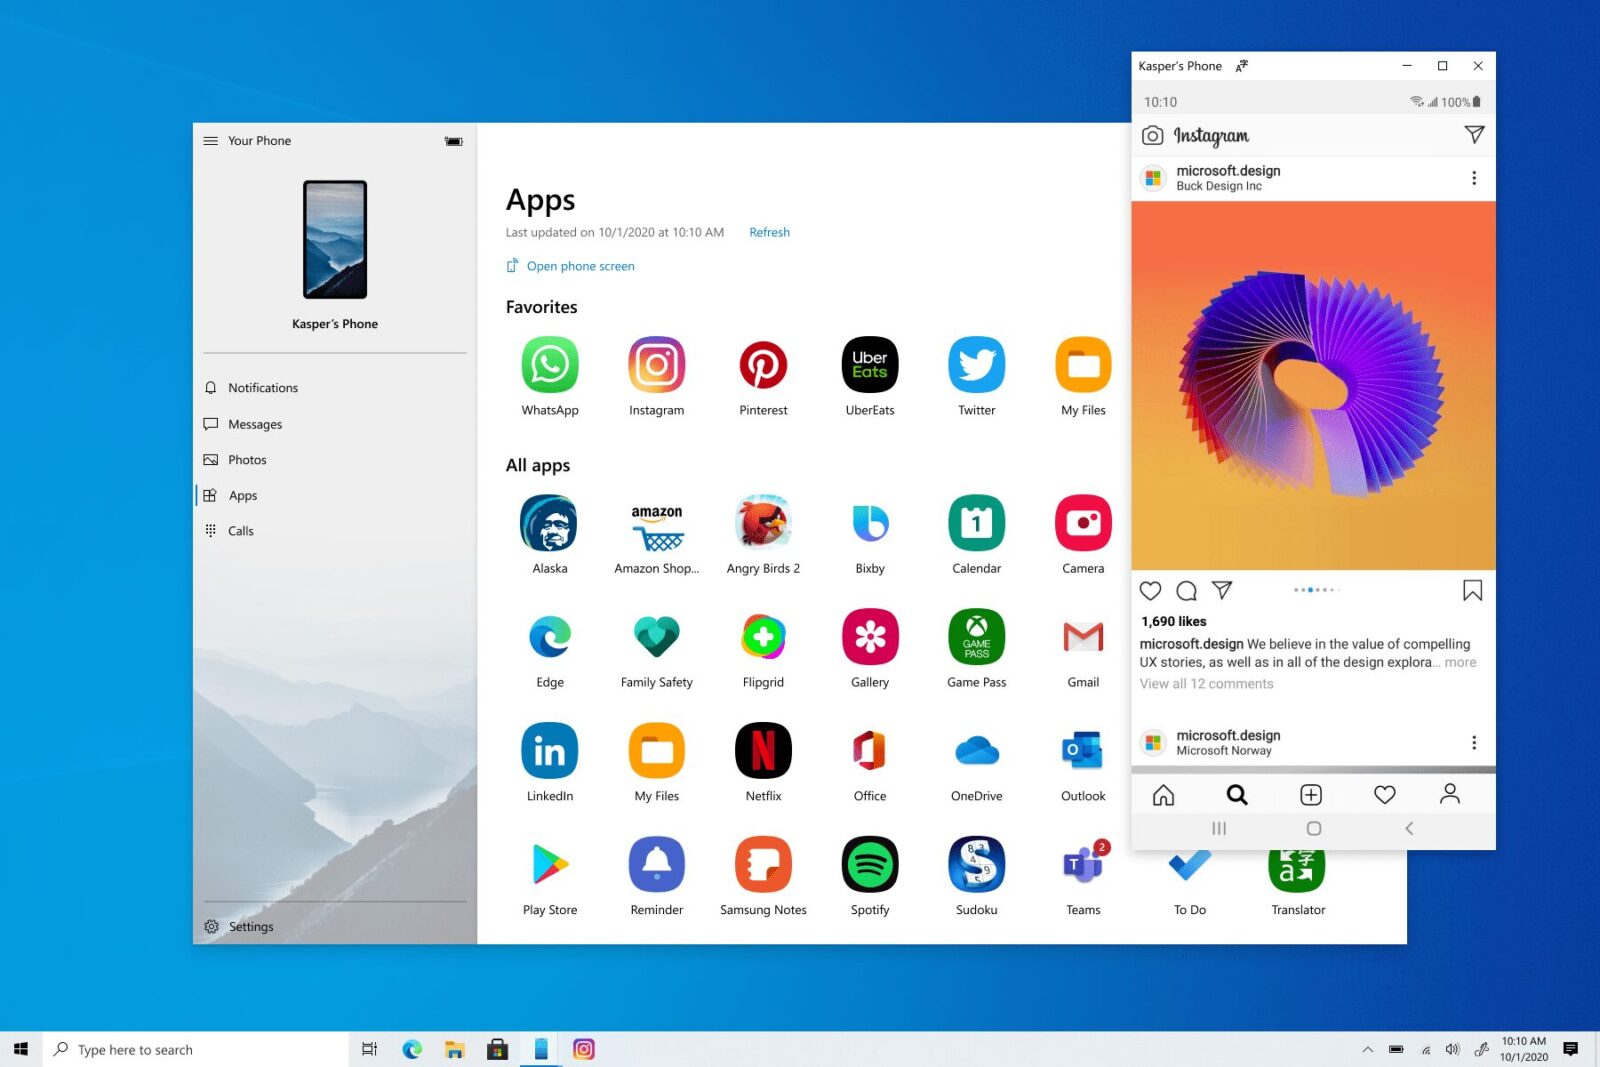 votre-telephone-windows-10-applications-android